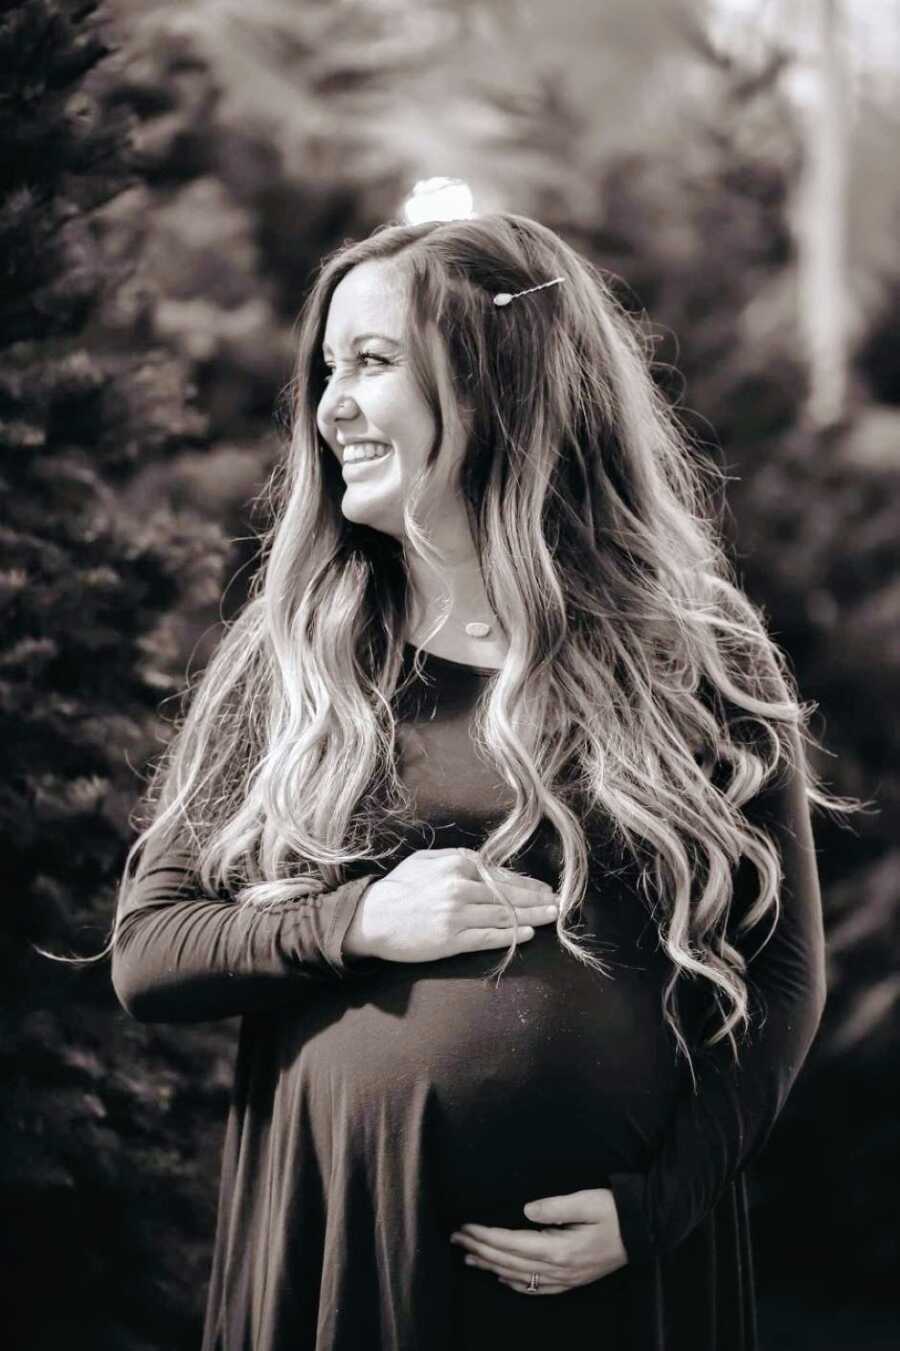 Heavily pregnant woman with severe OCD smiles for a photo while holding her baby bump